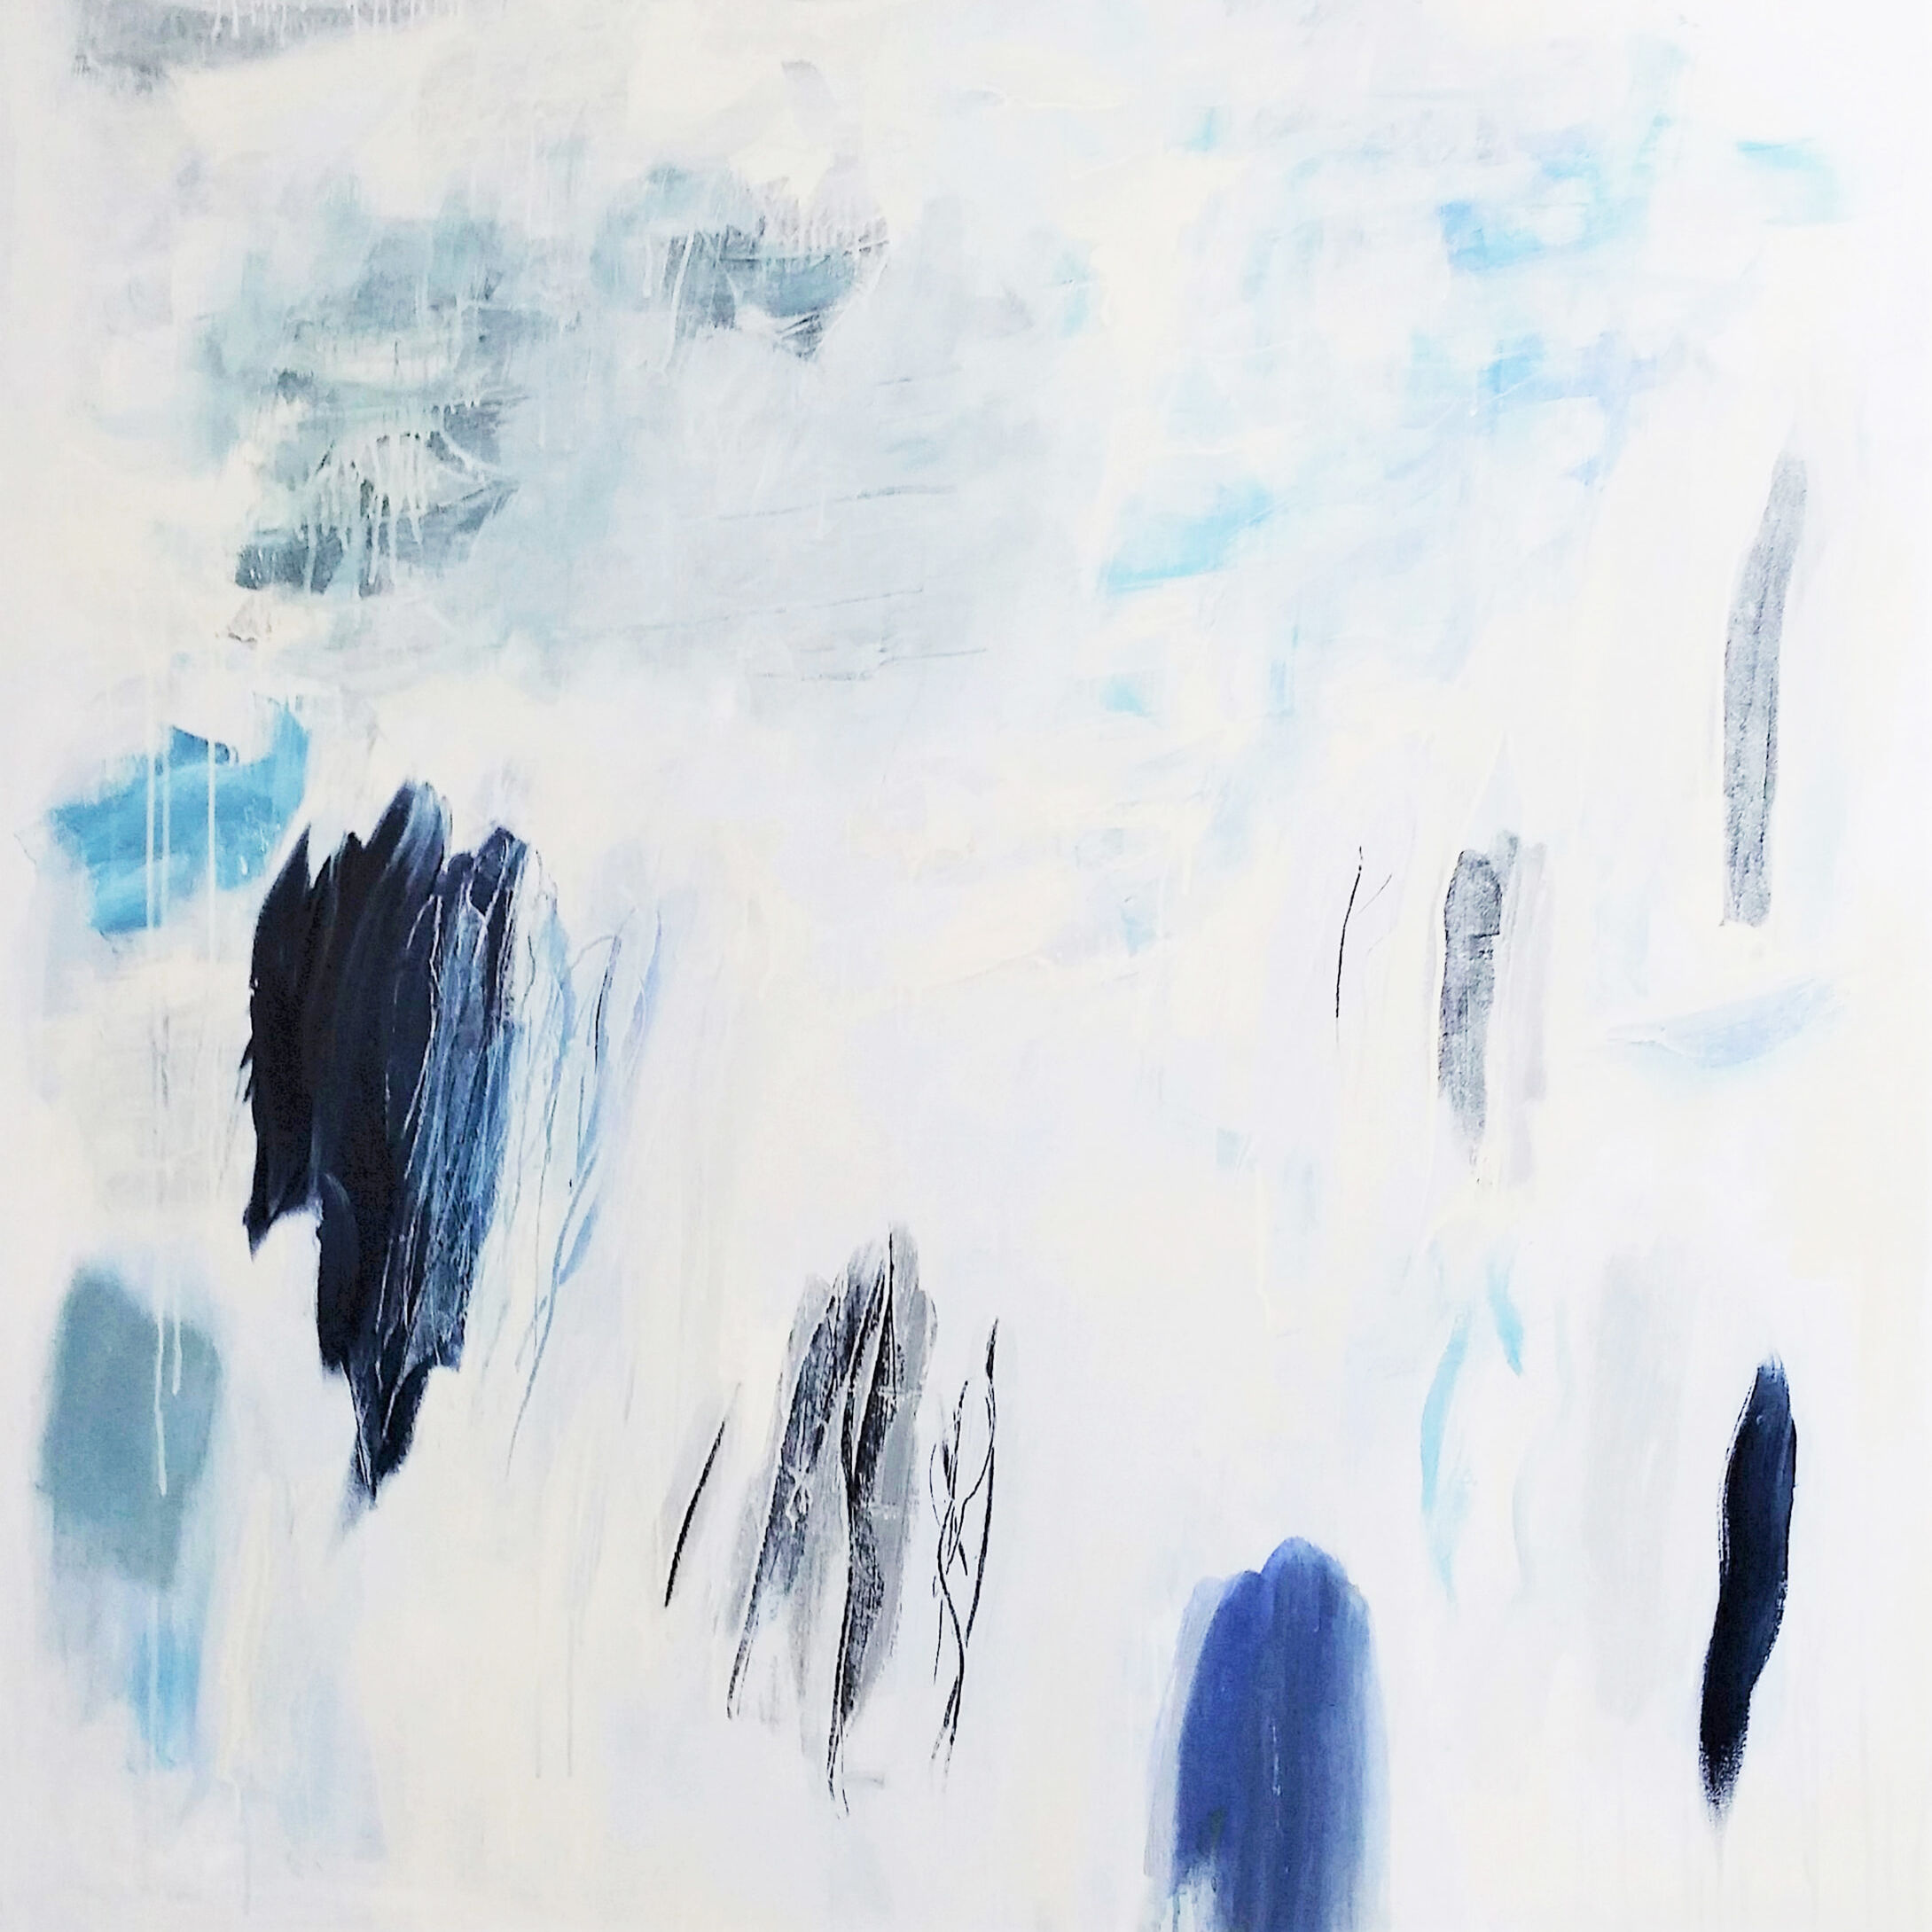 wendy stokes punctuated silence 1-123cmx123cm